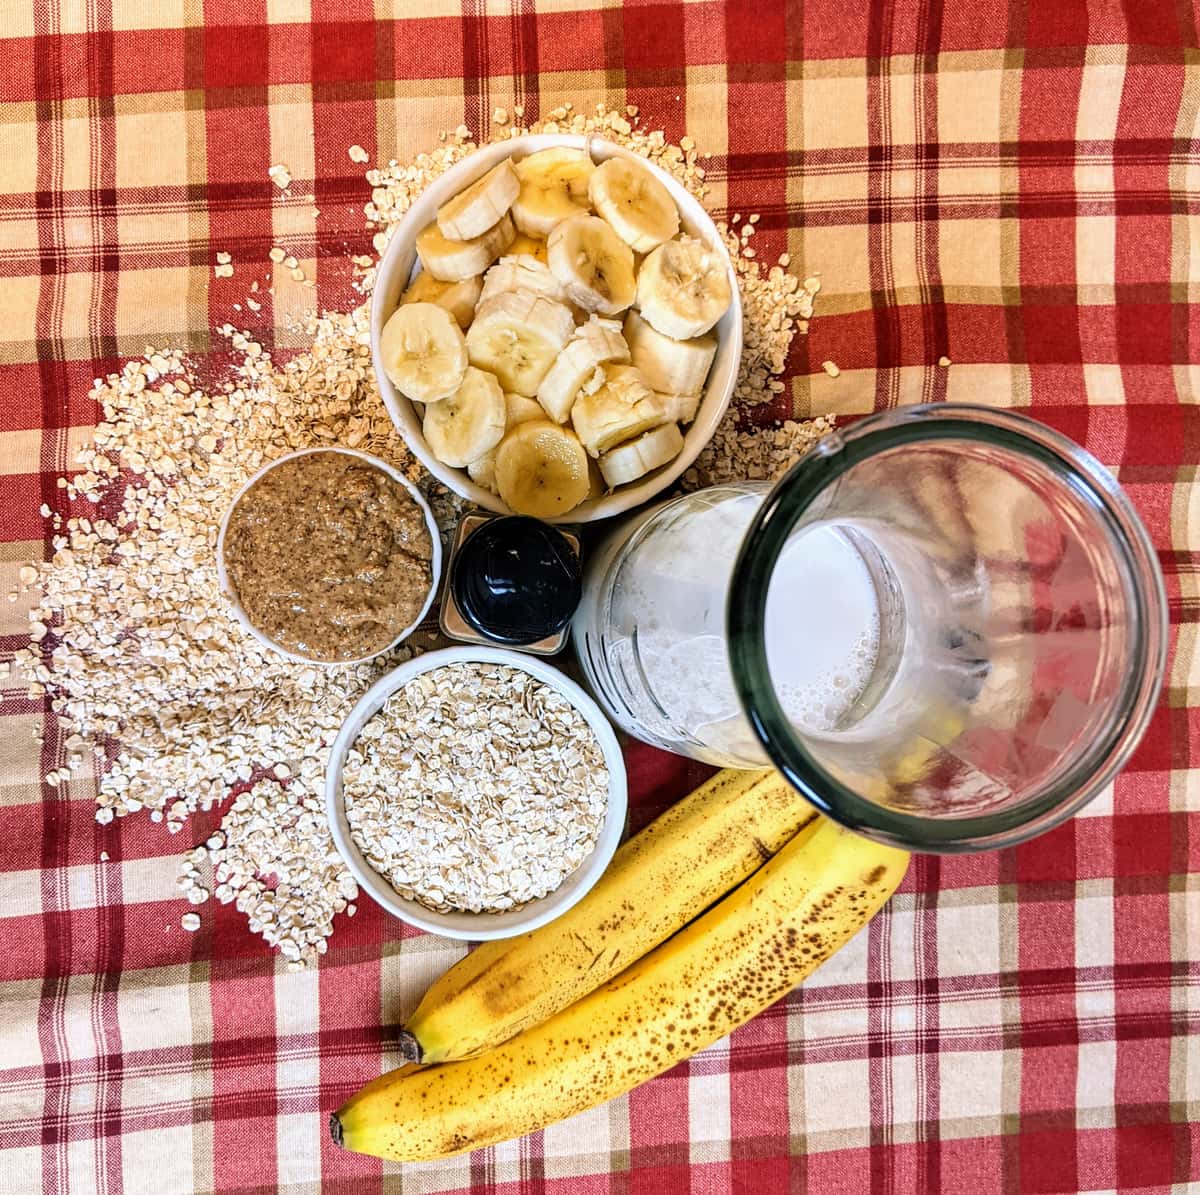 Ingredients for the Oatmeal Breakfast Smoothie Recipes